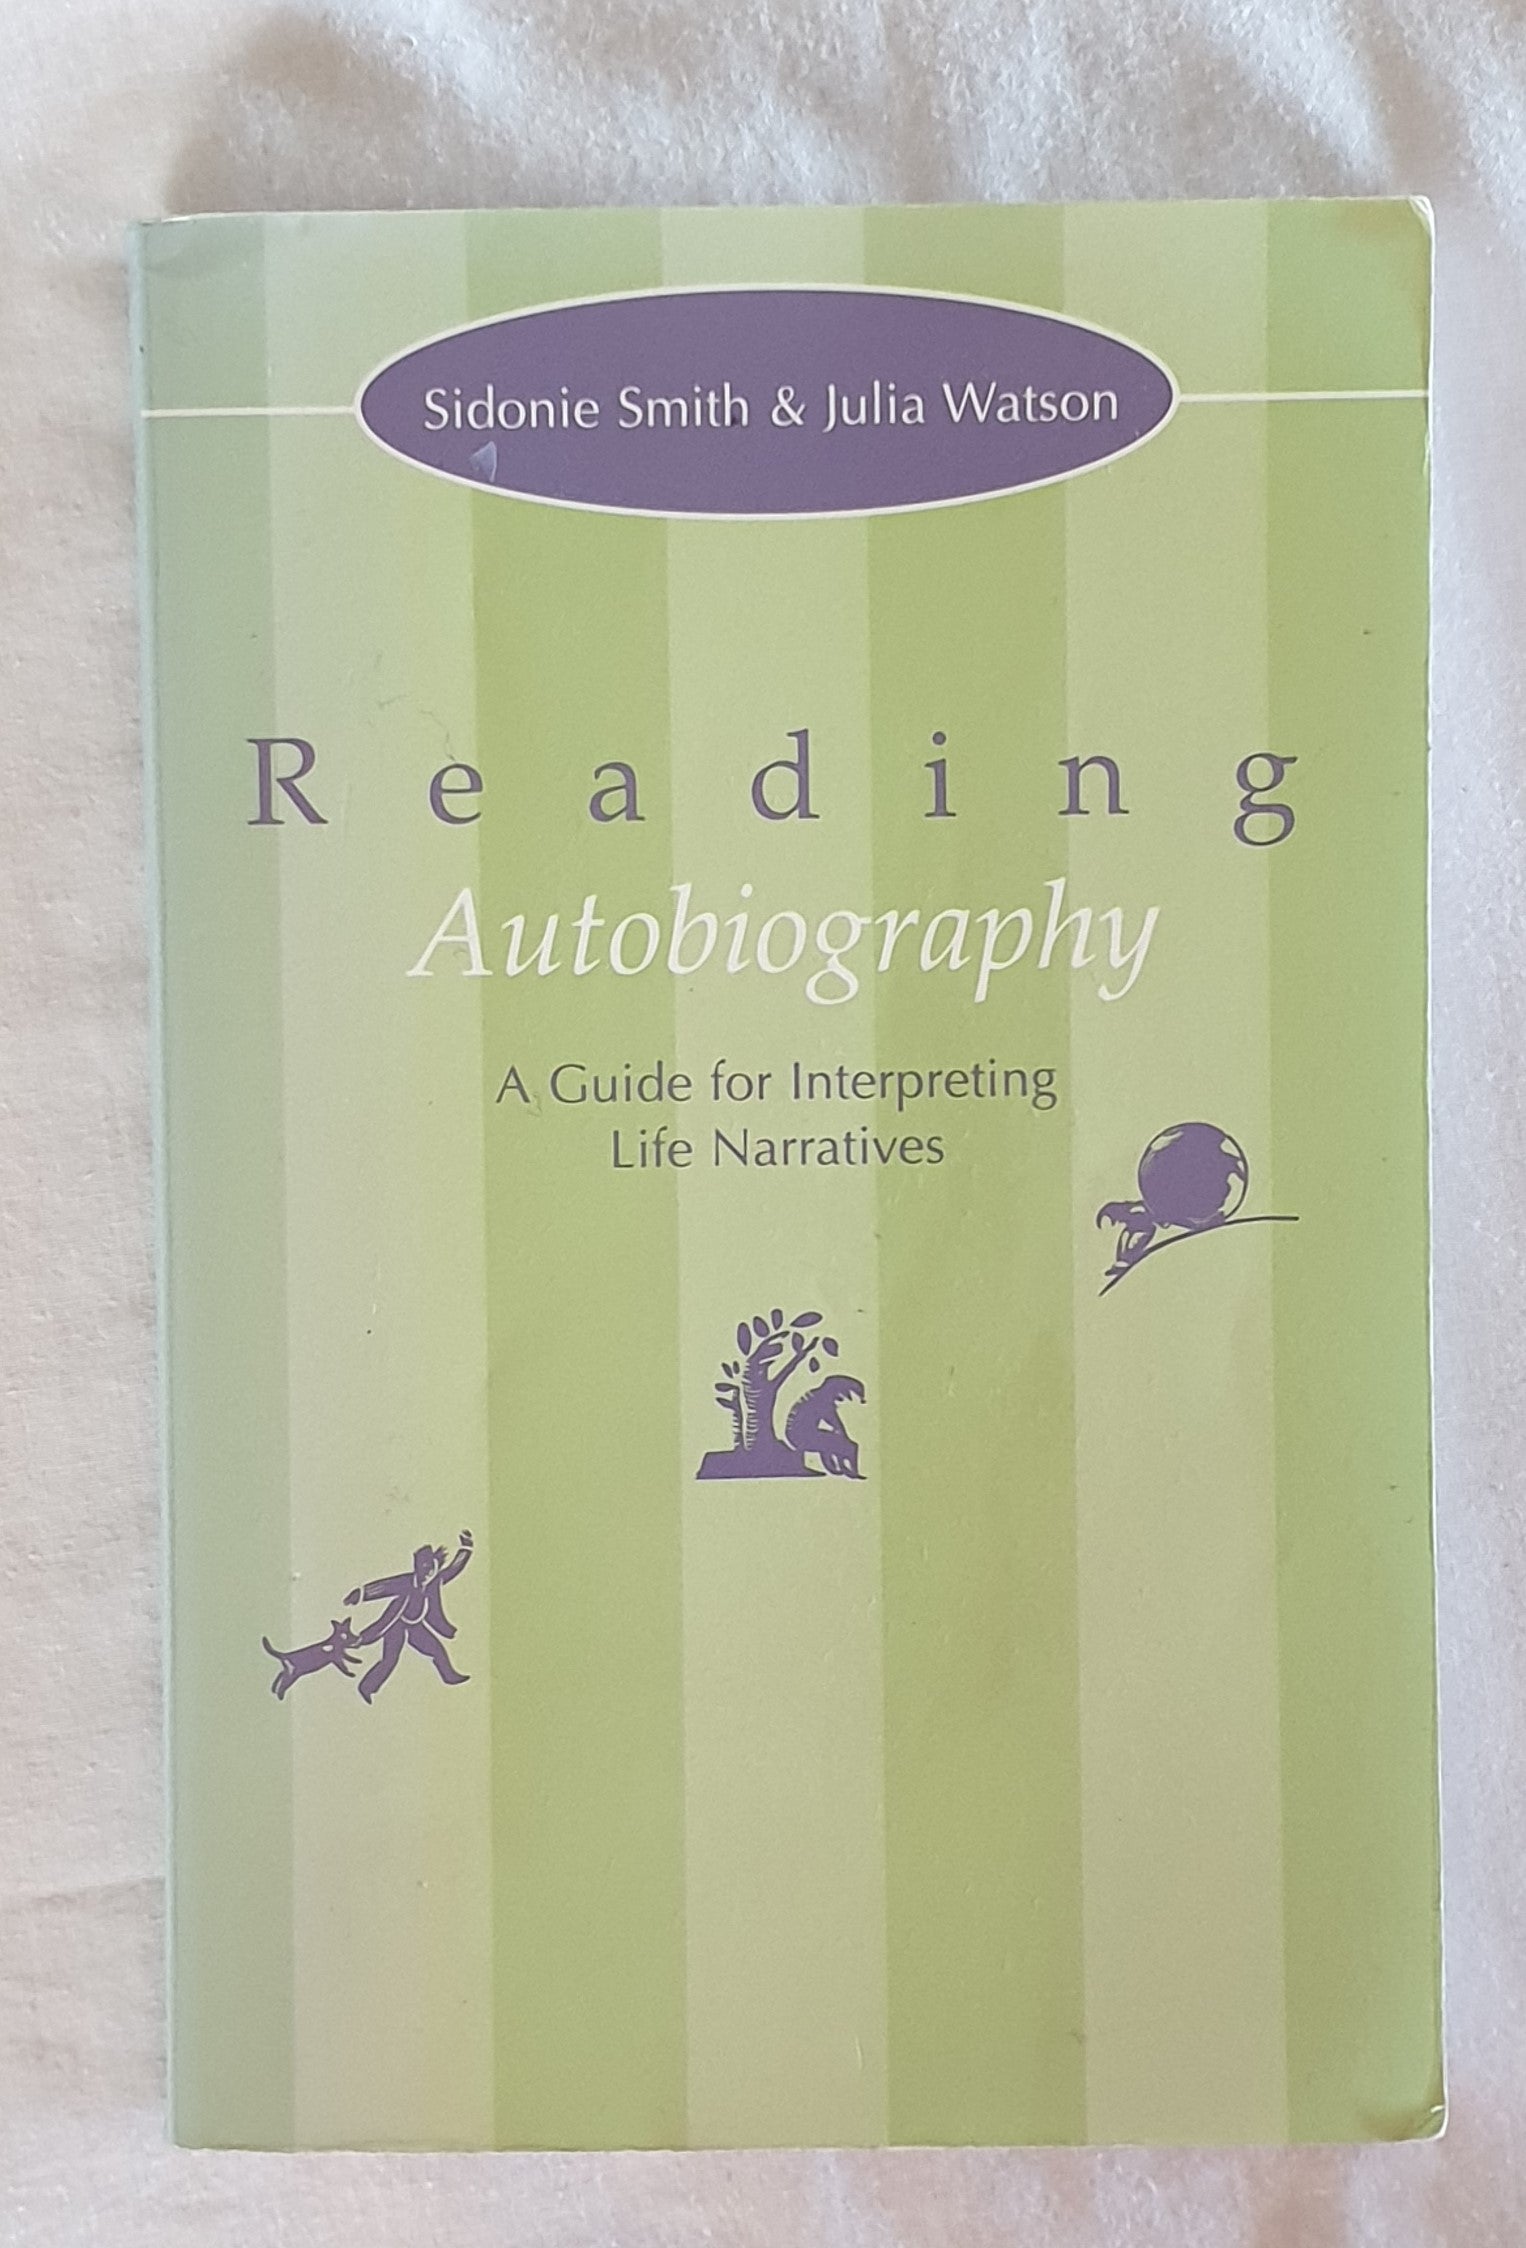 Reading Autobiography by Sidonie Smith and Julia Watson